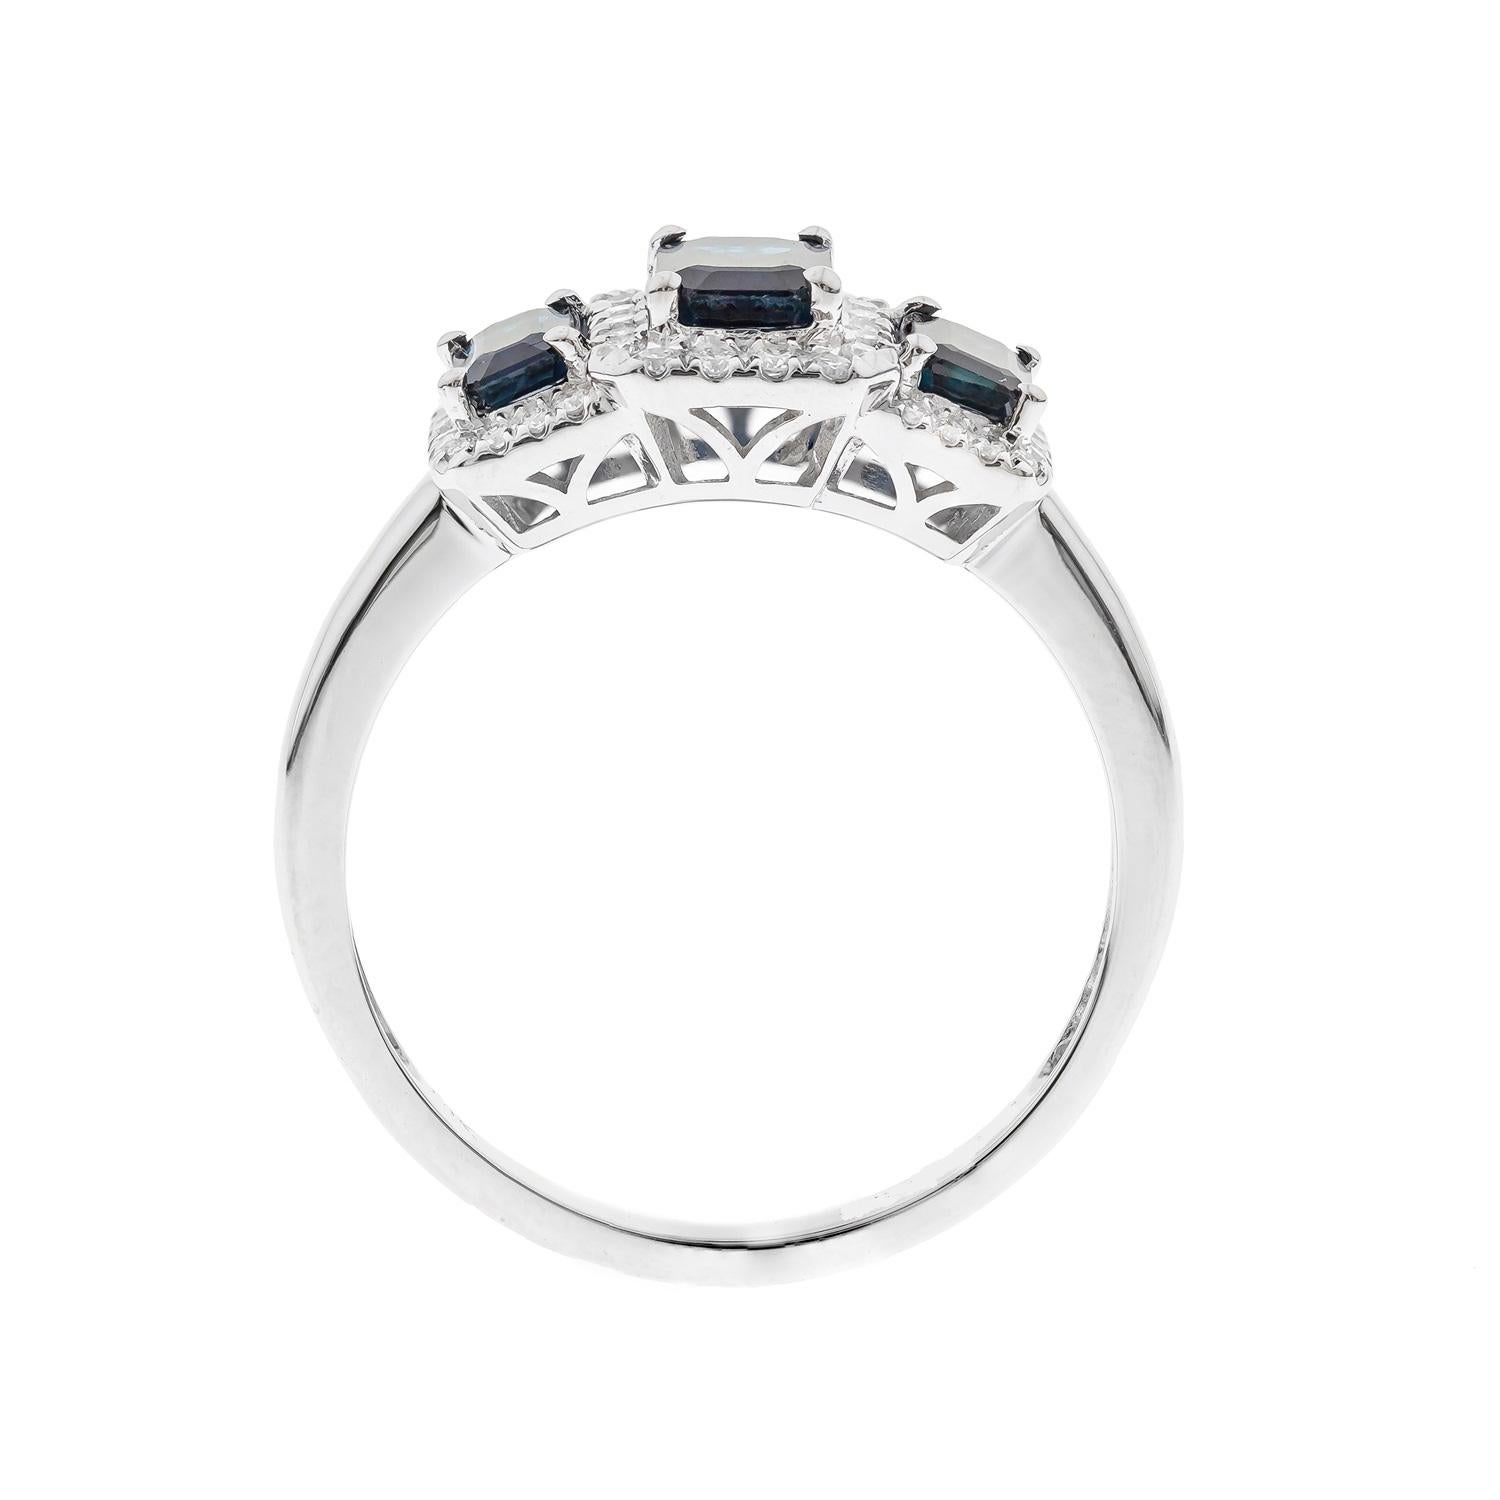 Stunning, timeless and classy eternity Unique Ring. Decorate yourself in luxury with this Gin & Grace Ring. The 14K White Gold jewelry boasts 5x3 mm (2 pcs) 0.69 carat, 6x4 mm (1 pcs) 0.62 carat Emerald-Cut Prong Setting Natural Blue Sapphire, along